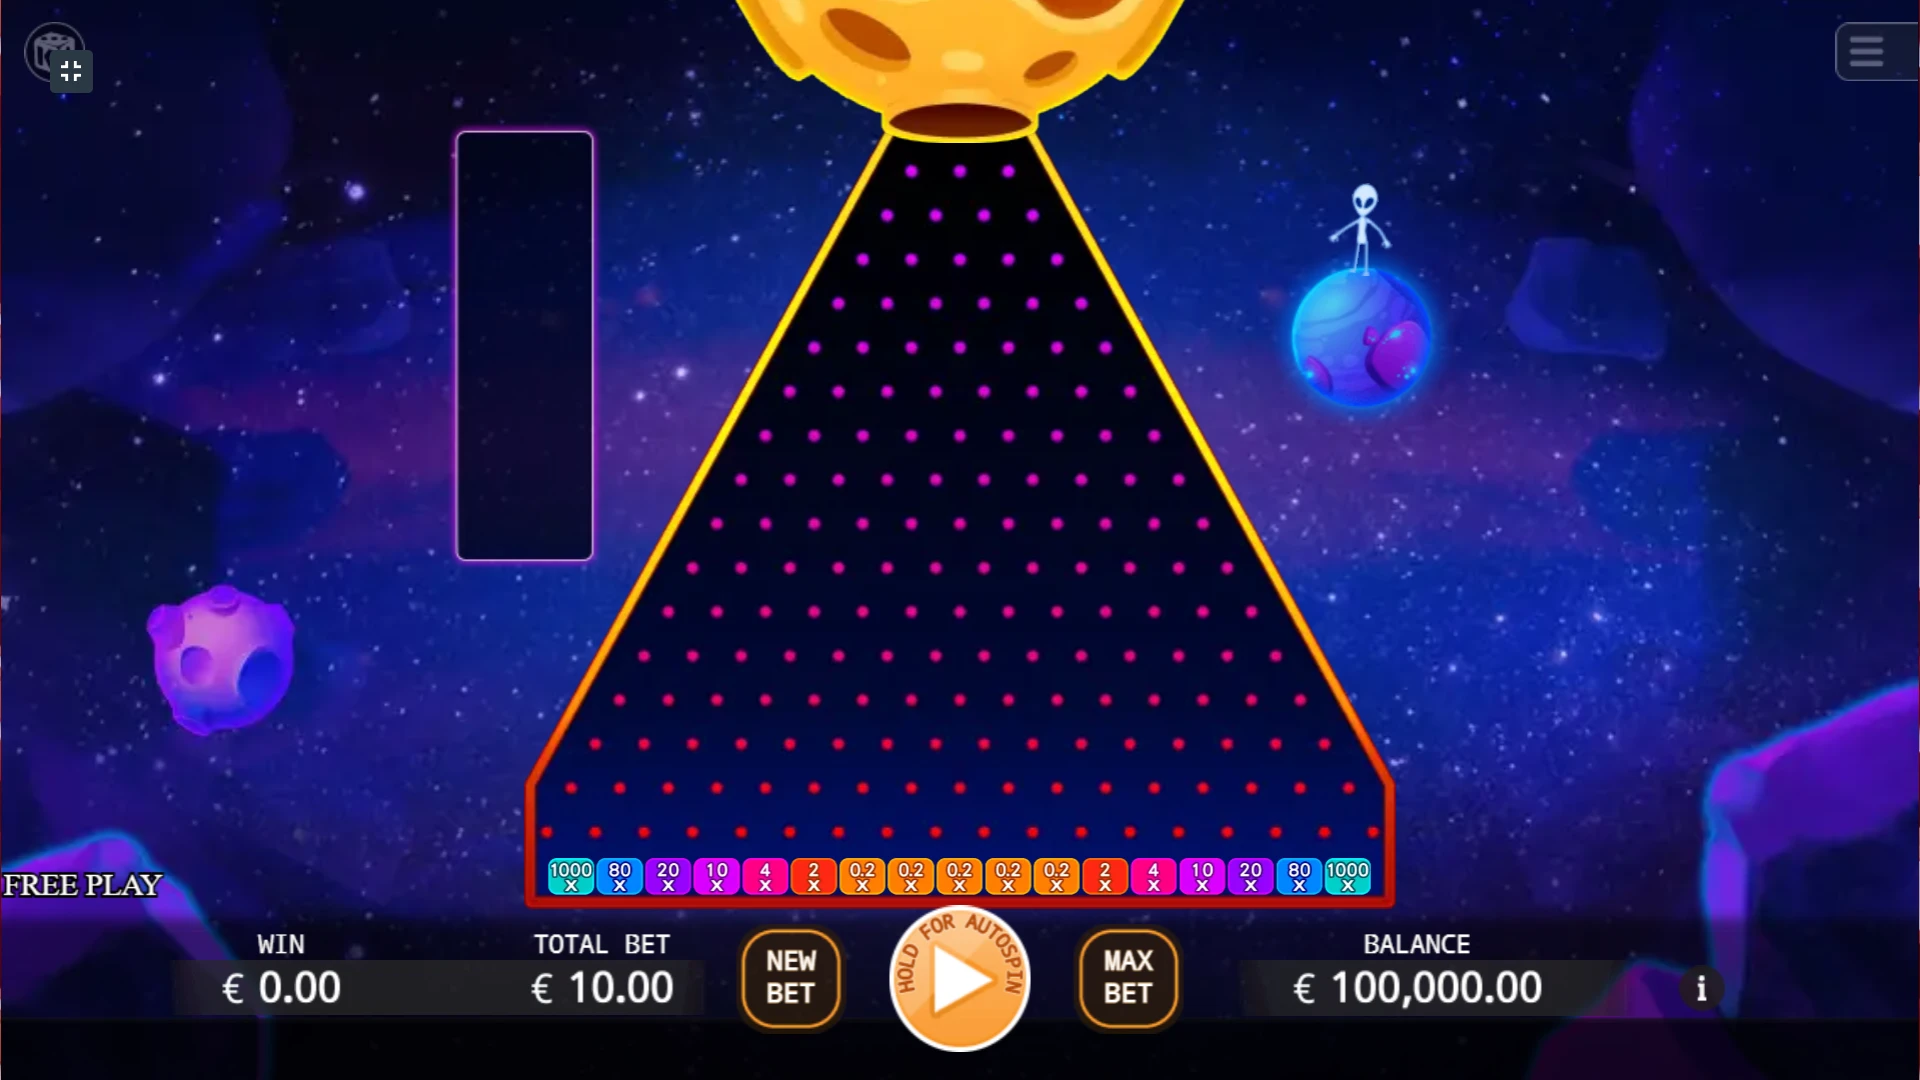 Explore the interface of one of the Plinko game options.